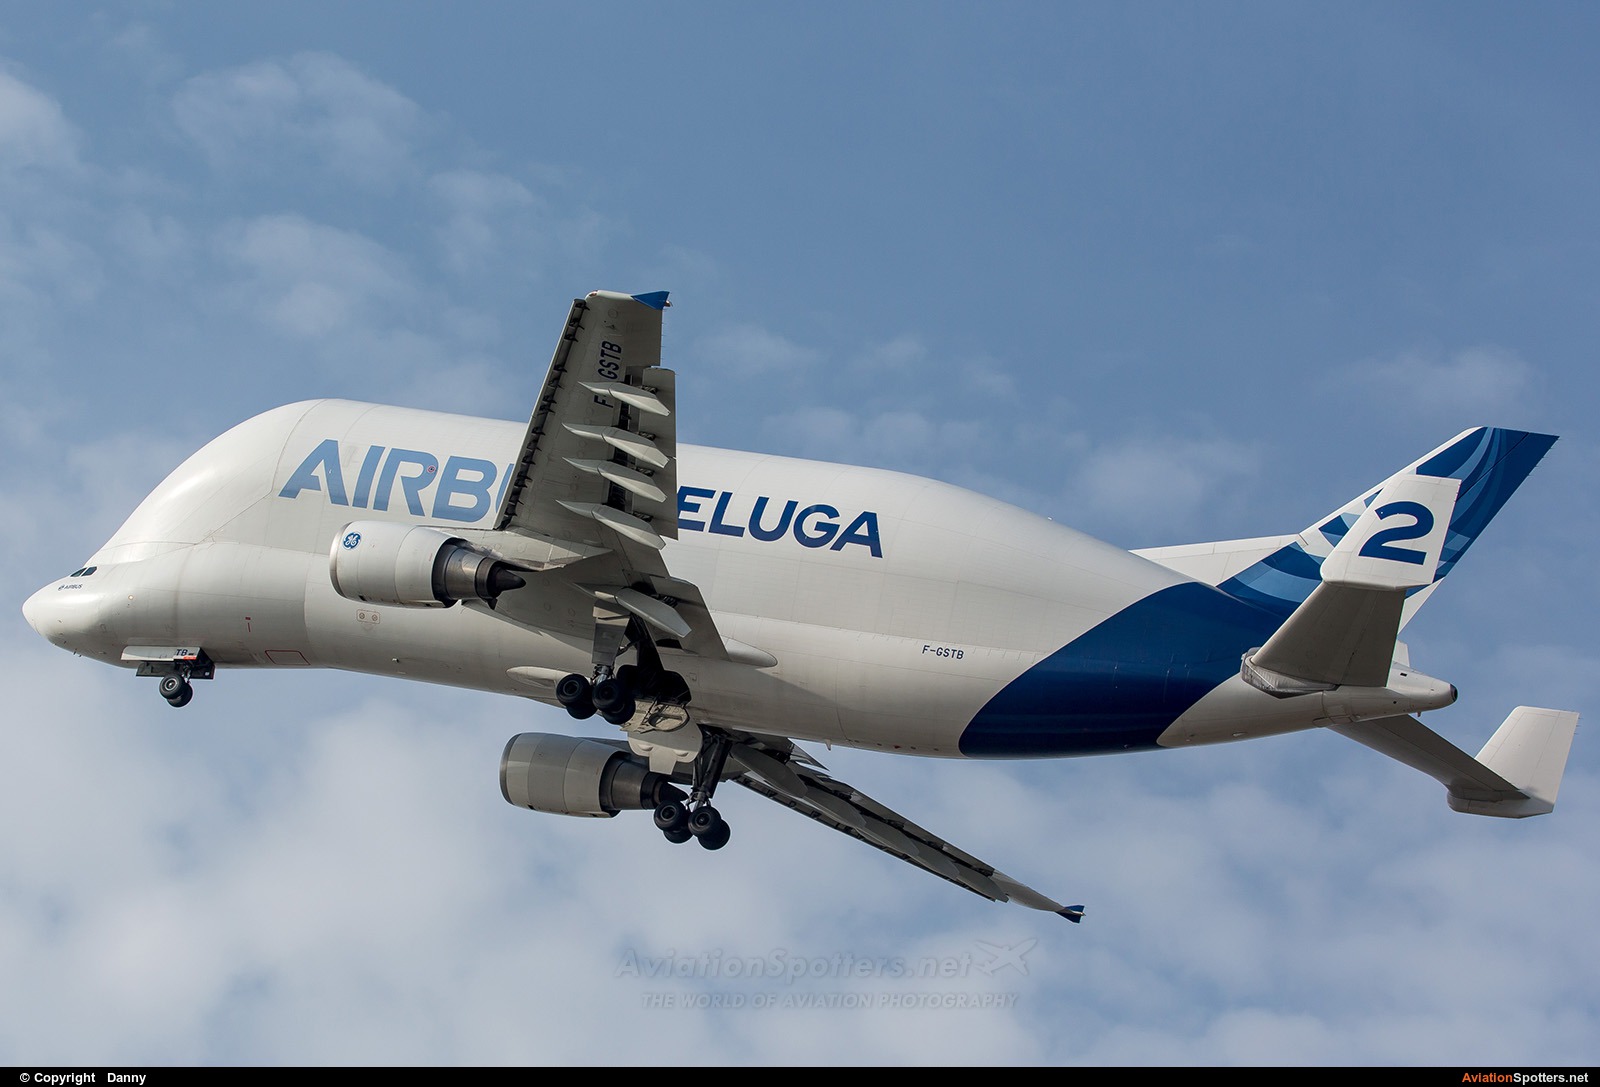 Airbus Industrie  -  A300 Beluga  (F-GSTB) By Danny (Digdis)